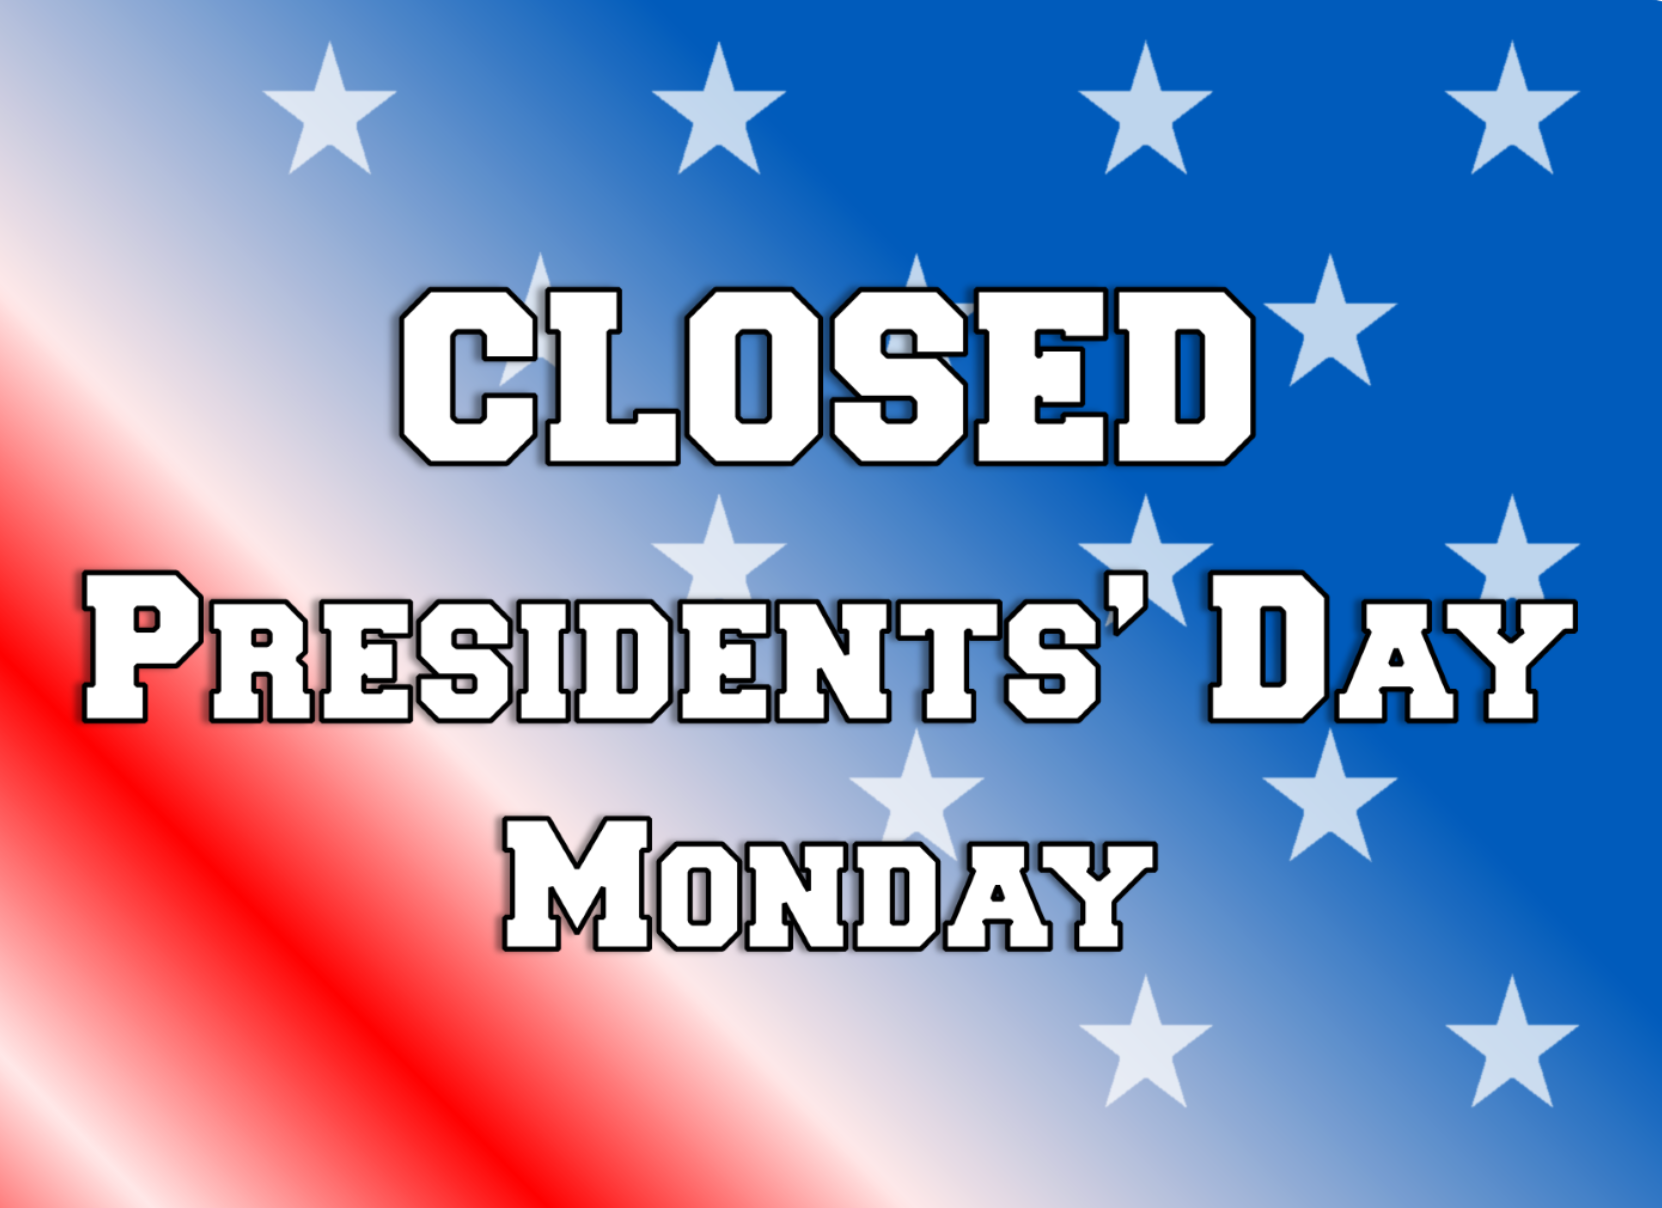 Closed for President's Day | PA CareerLink® of Lancaster County